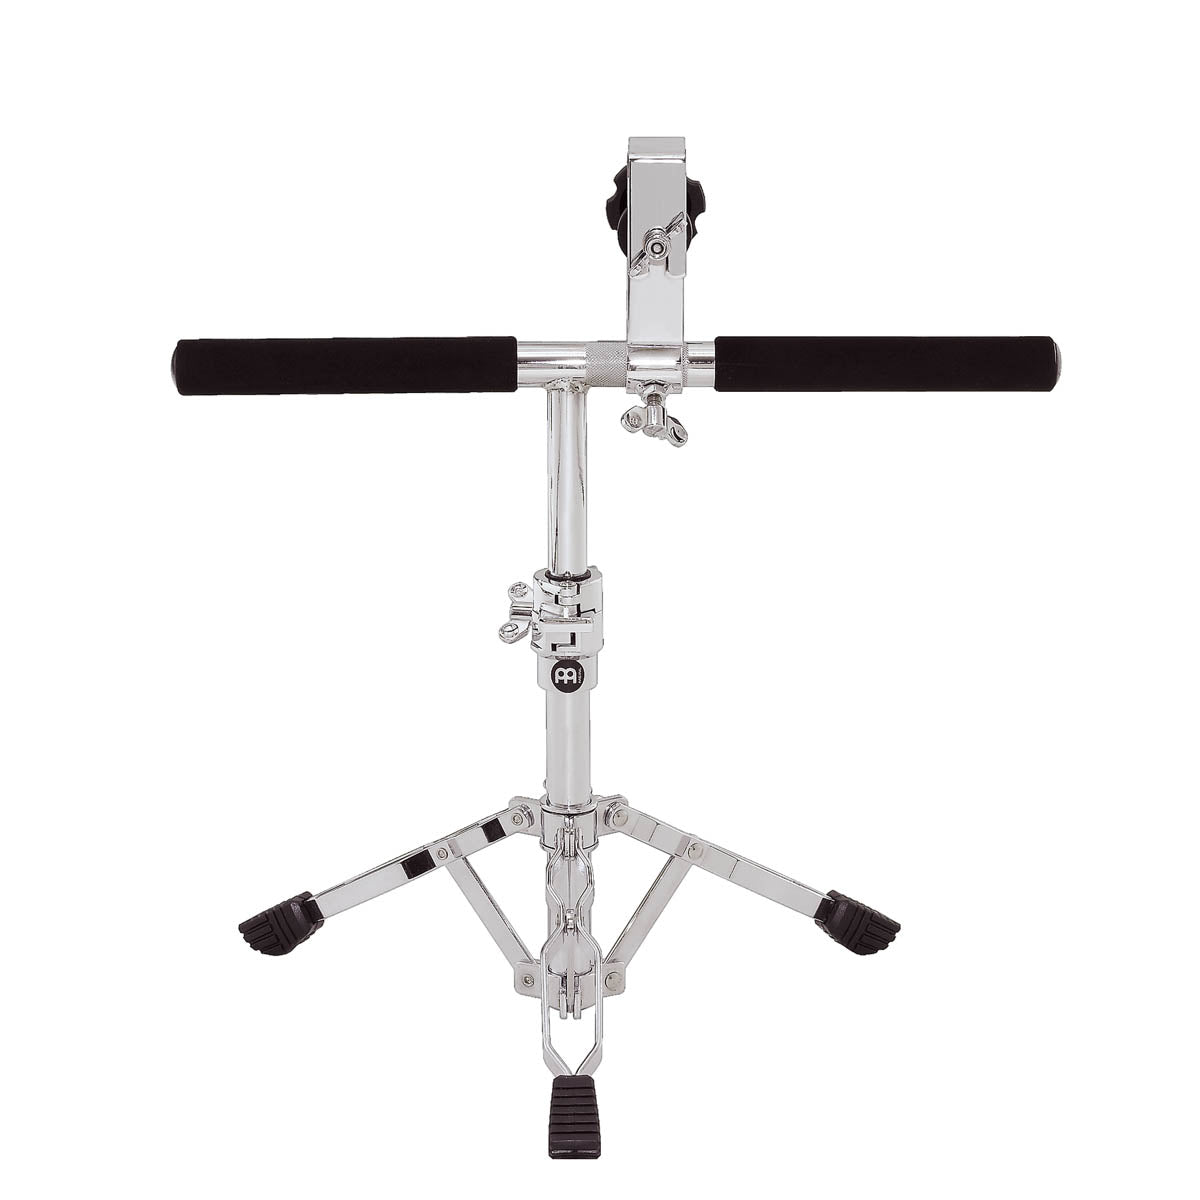 Meinl Professional Bongo Stand for Seated Players